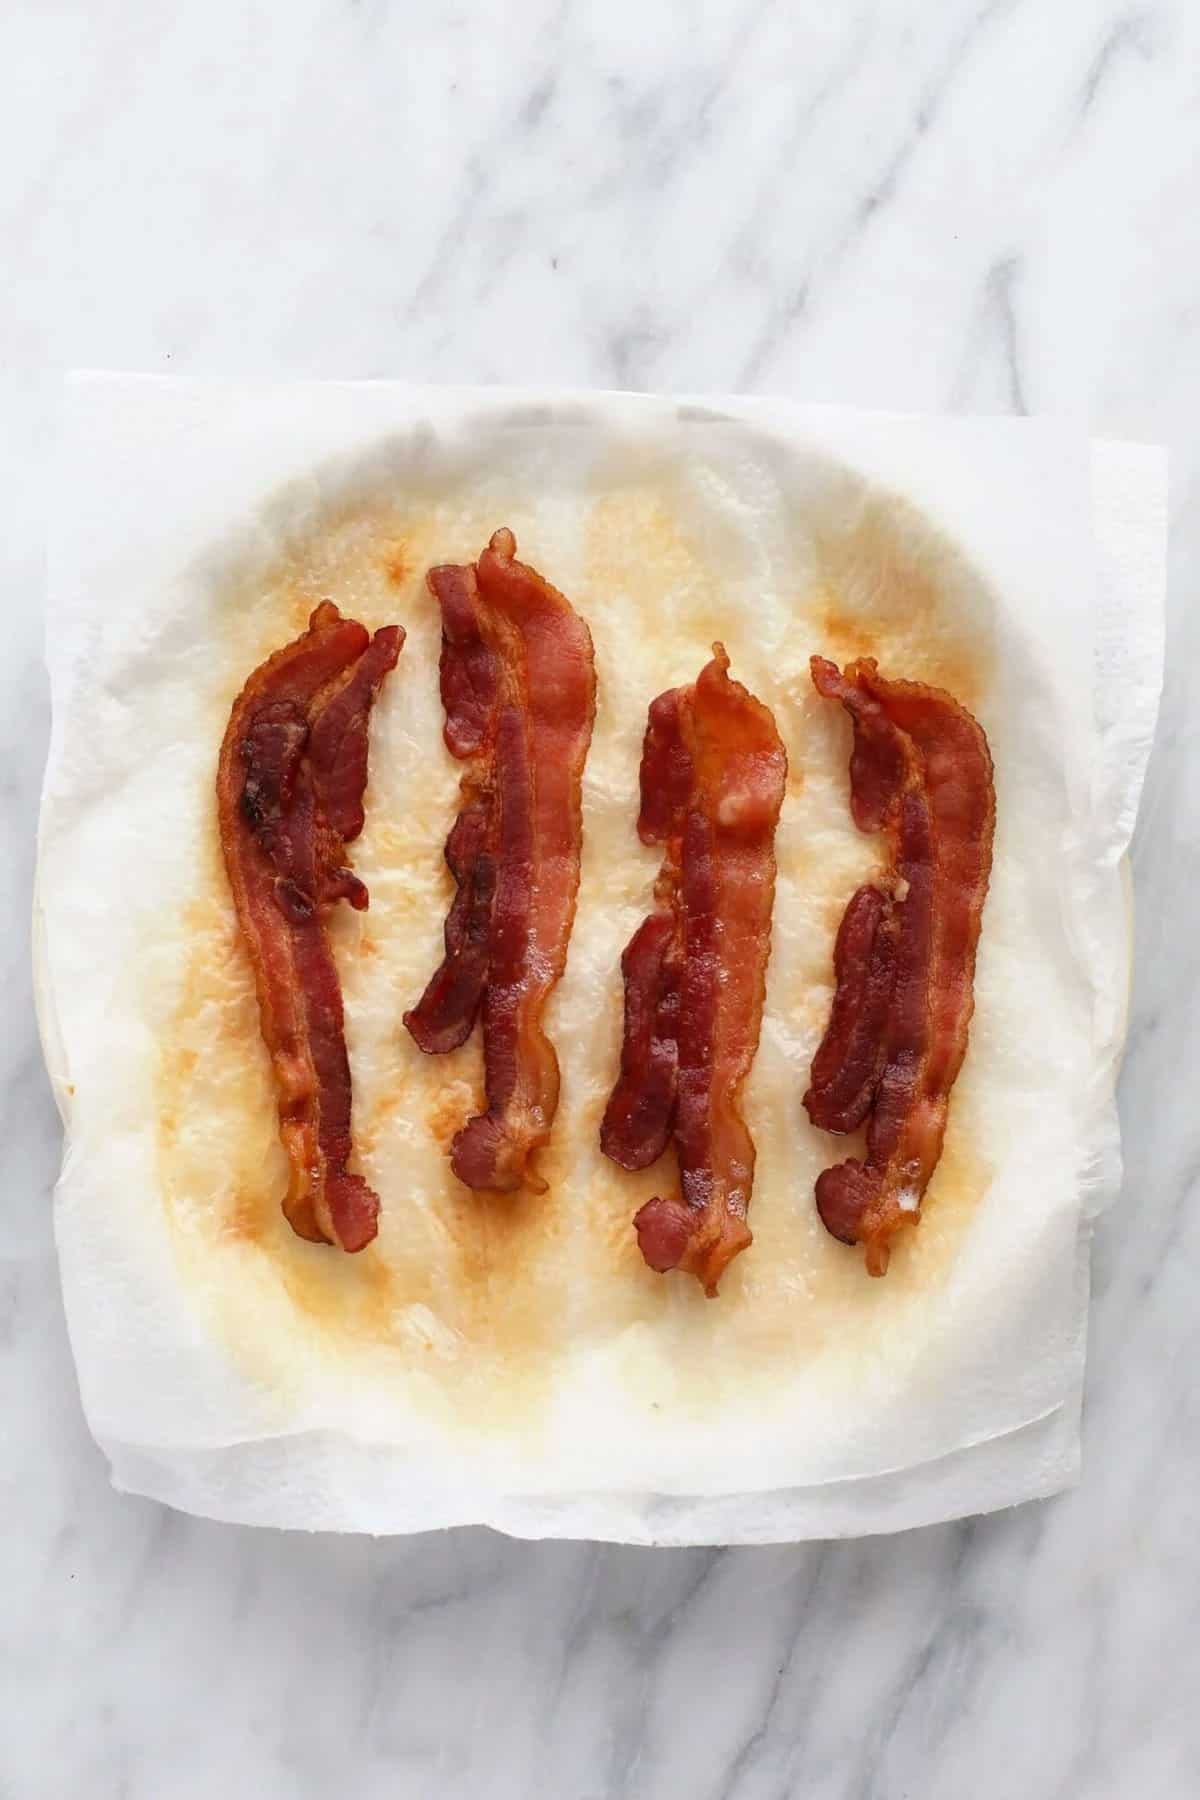 https://fitfoodiefinds.com/wp-content/uploads/2021/02/bacon-in-microwave2.jpg